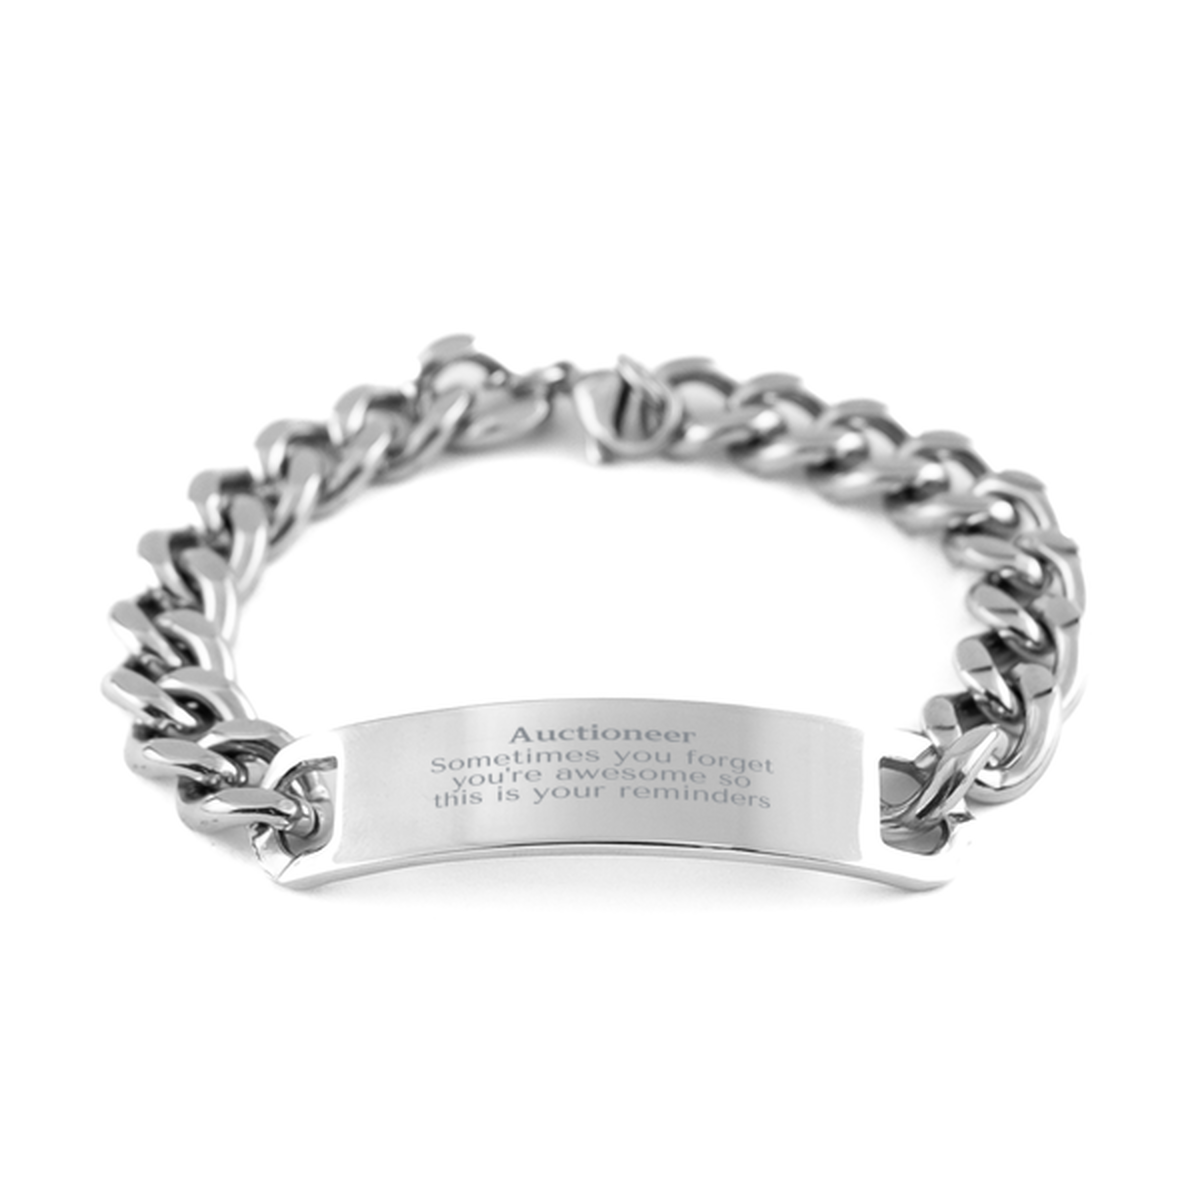 Sentimental Auctioneer Cuban Chain Stainless Steel Bracelet, Auctioneer Sometimes you forget you're awesome so this is your reminders, Graduation Christmas Birthday Gifts for Auctioneer, Men, Women, Coworkers